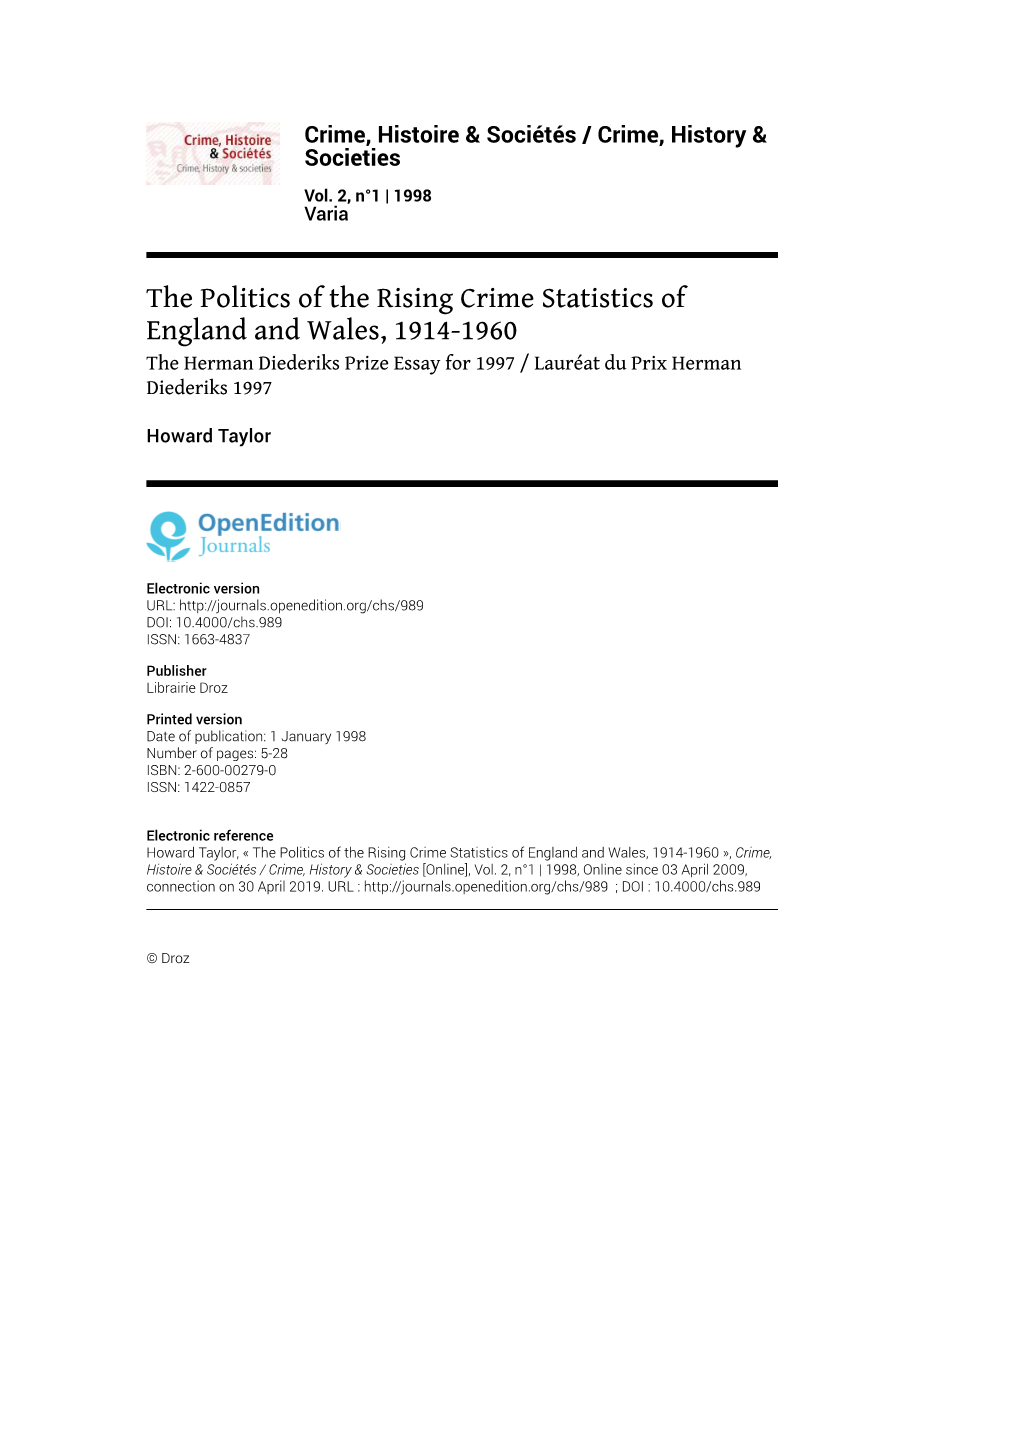 The Politics of the Rising Crime Statistics of England and Wales, 1914-1960 the Herman Diederiks Prize Essay for 1997 / Lauréat Du Prix Herman Diederiks 1997